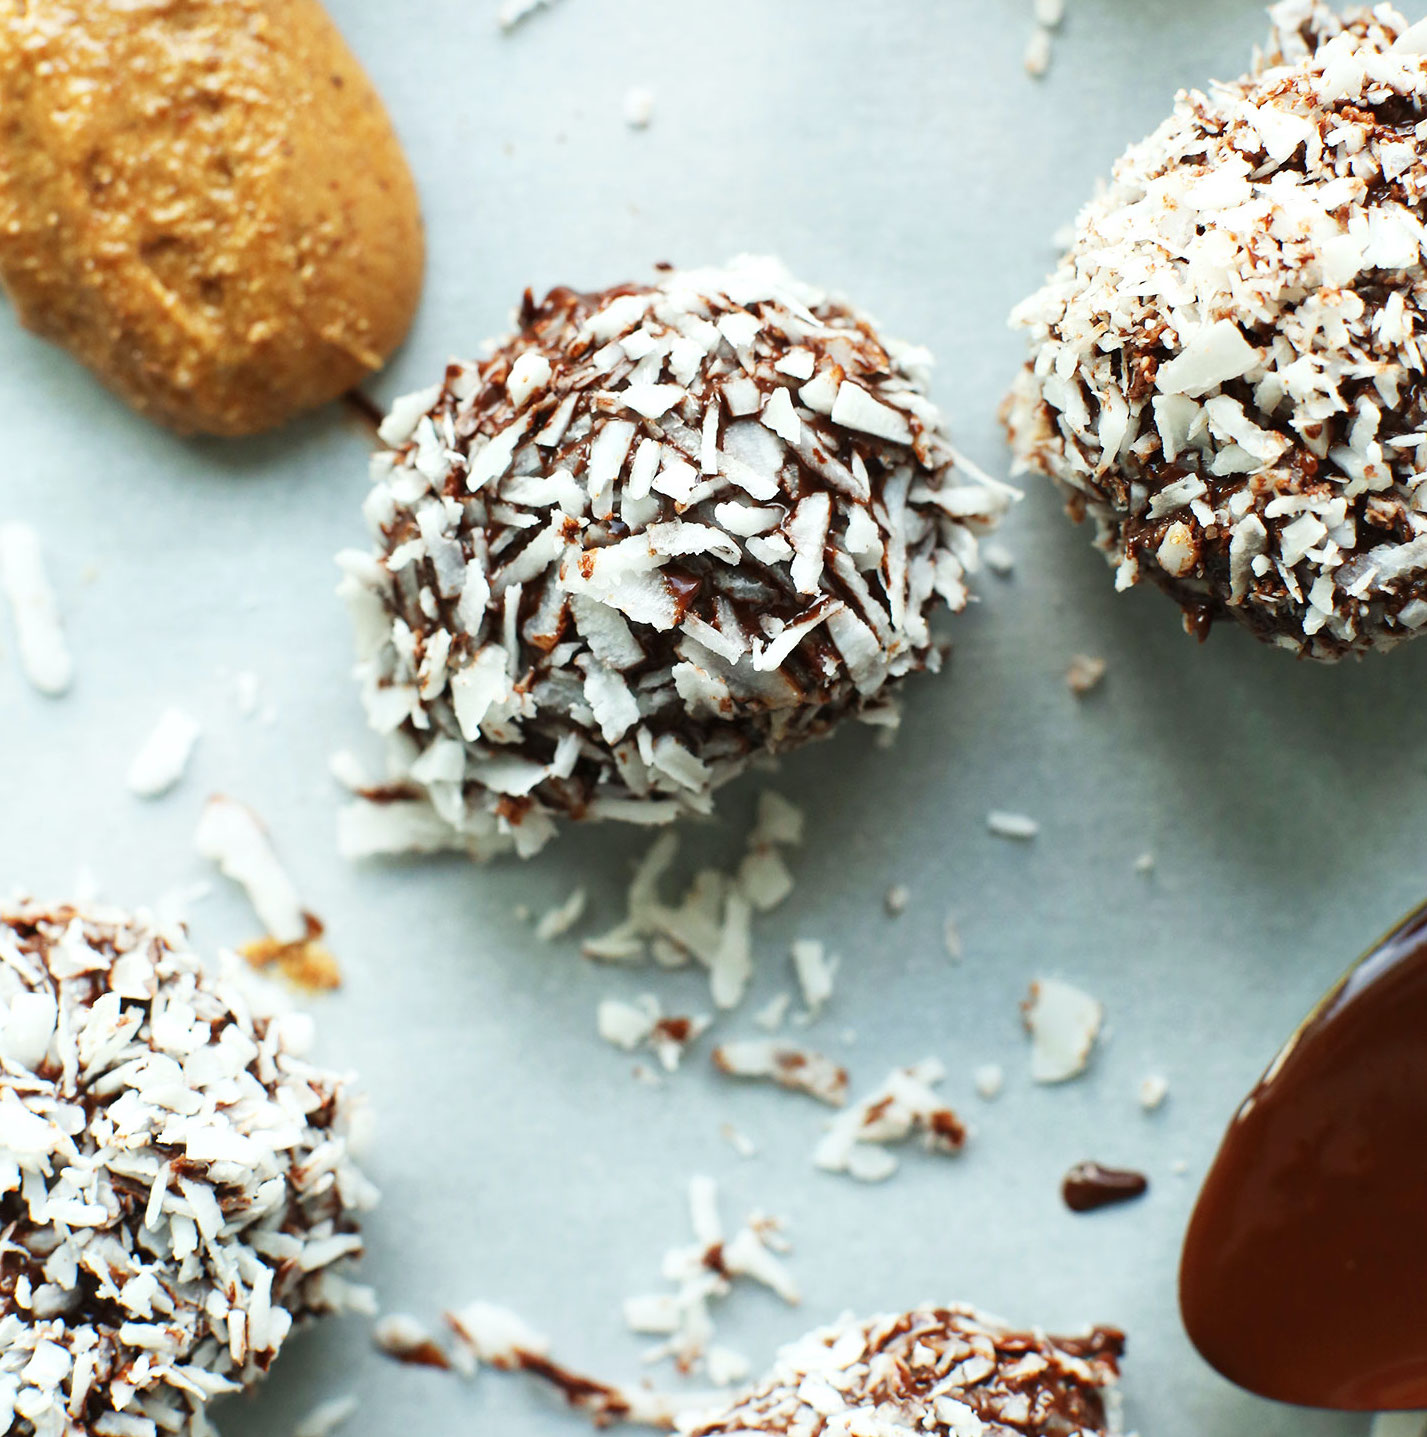 Spoonfuls of almond butter and dark chocolate beside Vegan Chocolate Snowballs made with dates